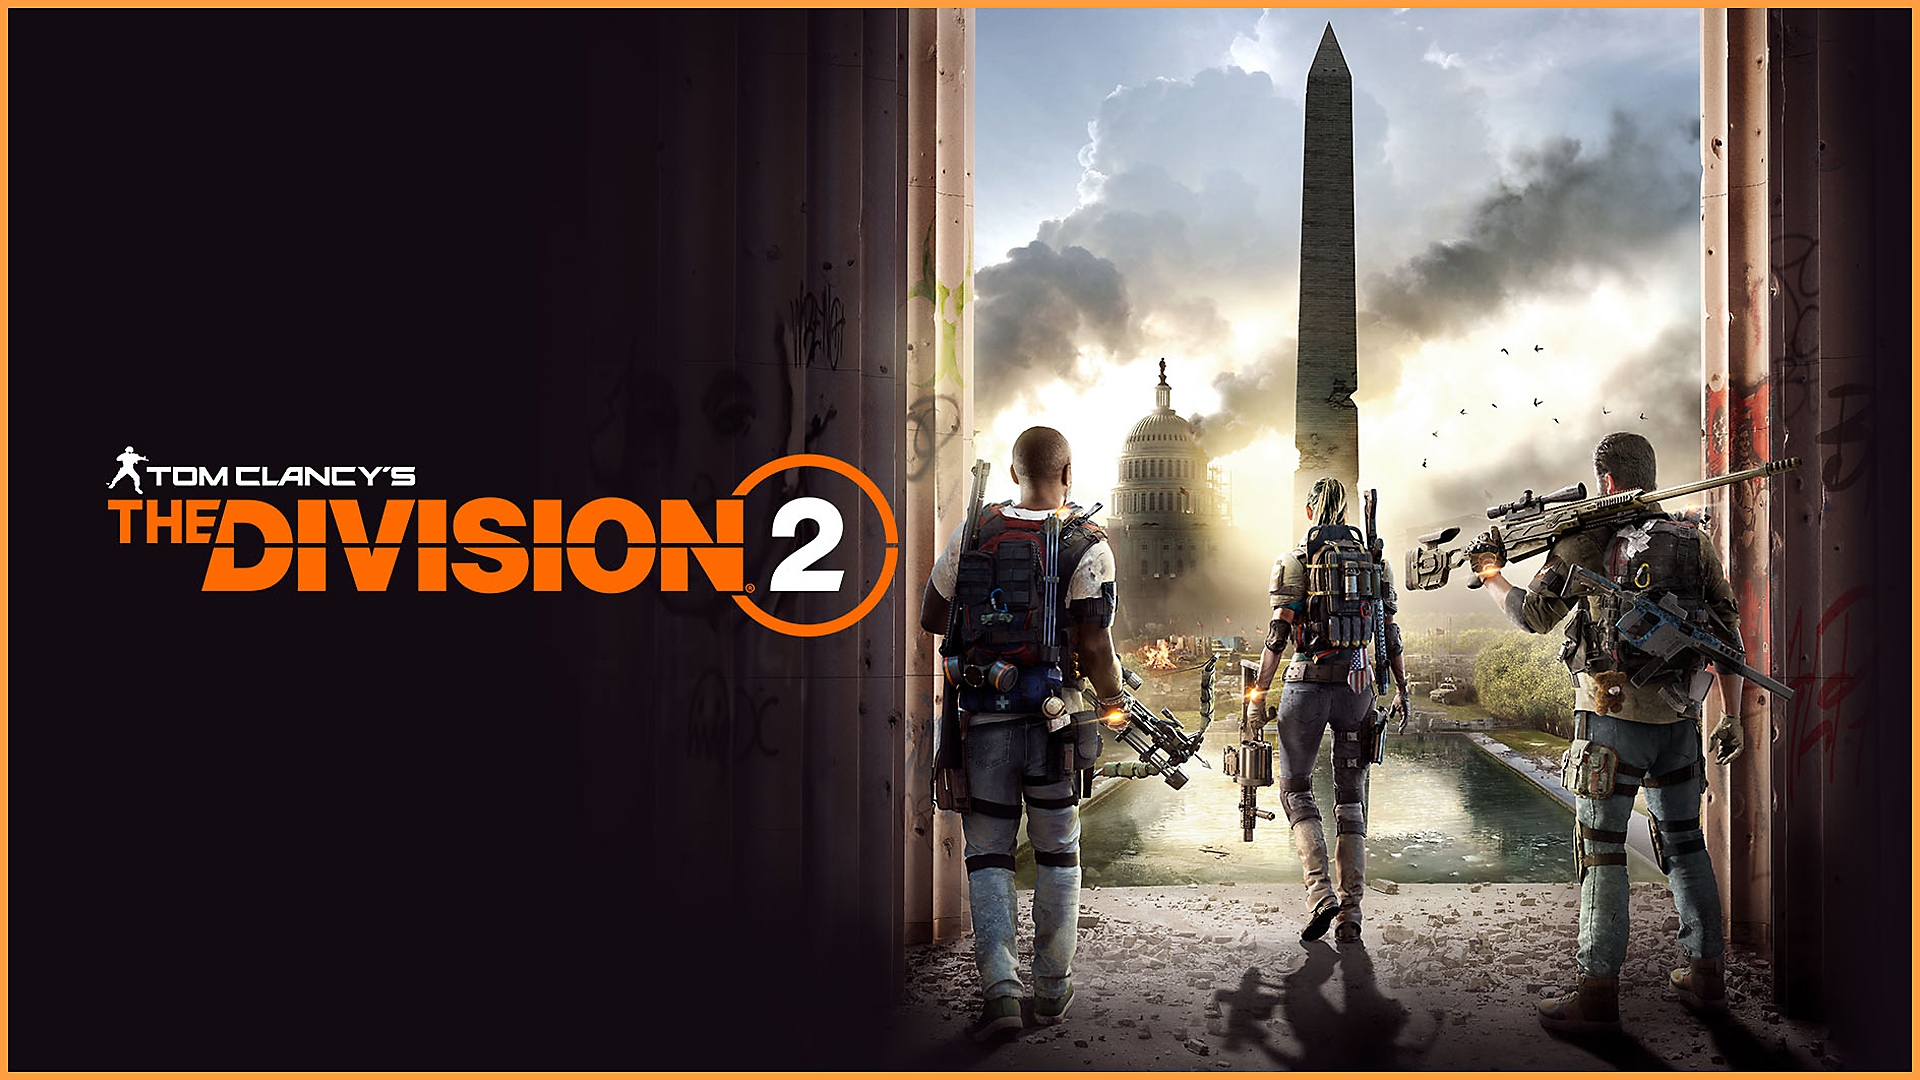 Tom Clancy’s The Division 2 - Official Launch Trailer | PS4